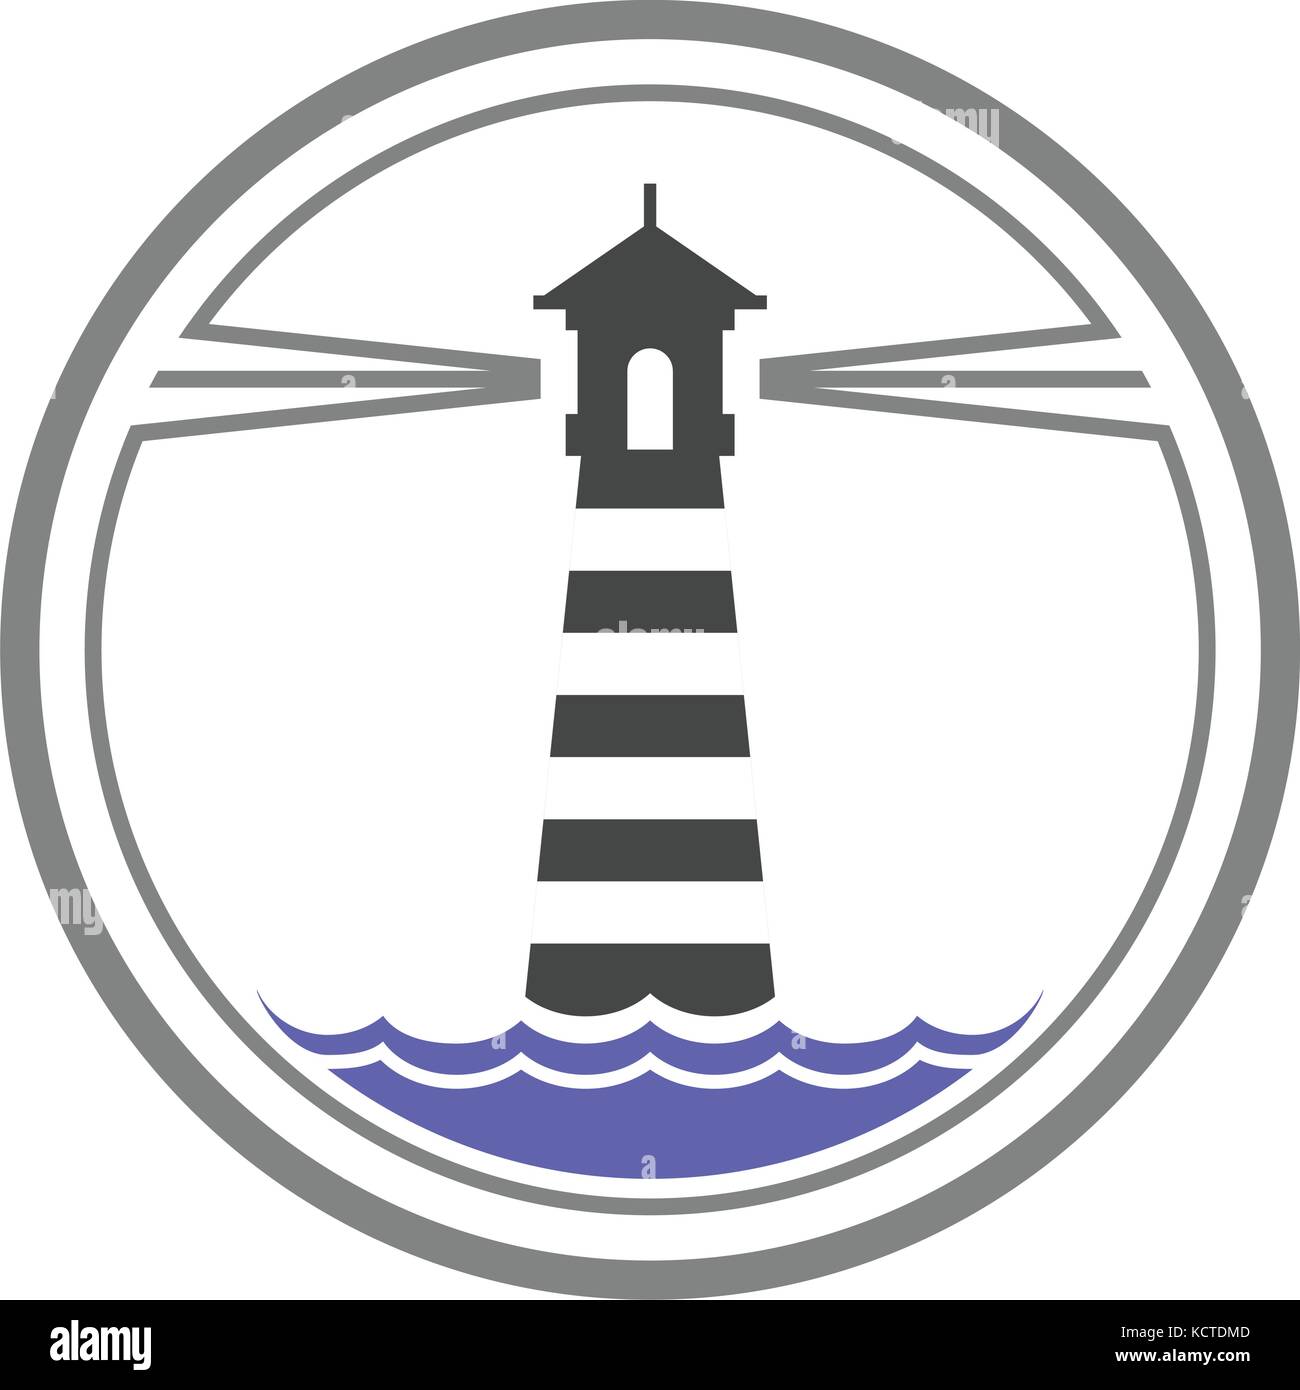 Maritime lighthouse icon on waves Stock Vector